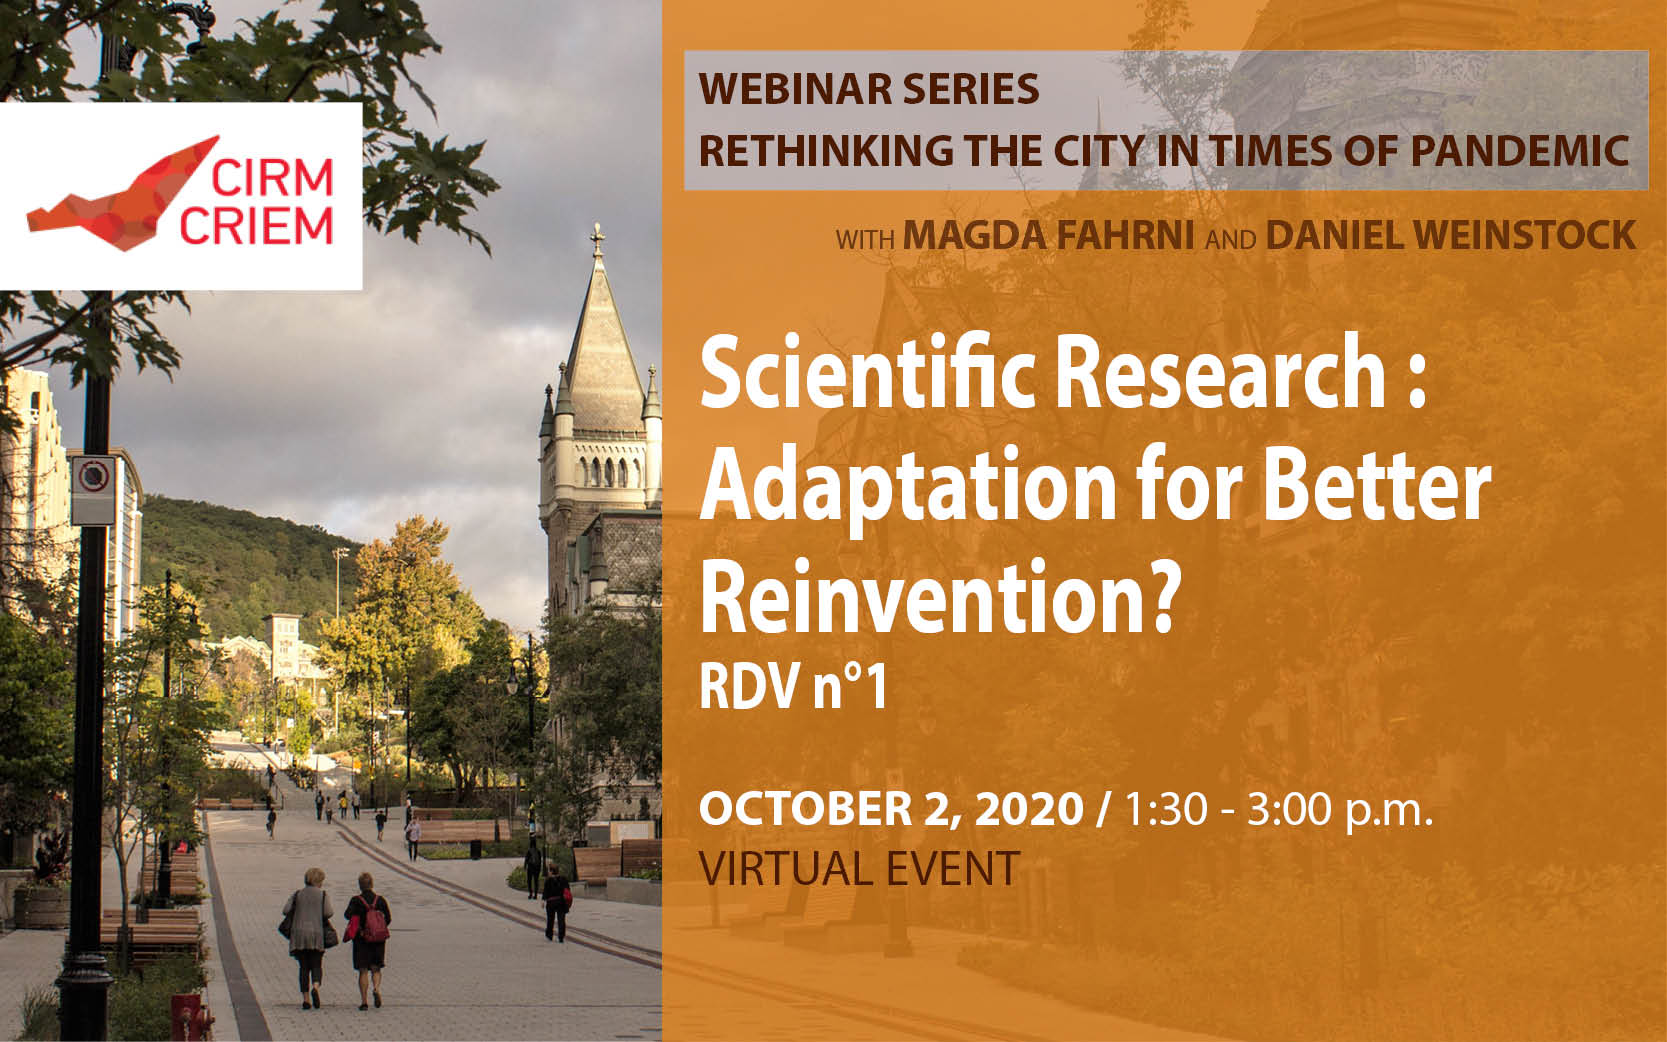 Poster for "Scientific Research: Adaptation for Better Reinvention"